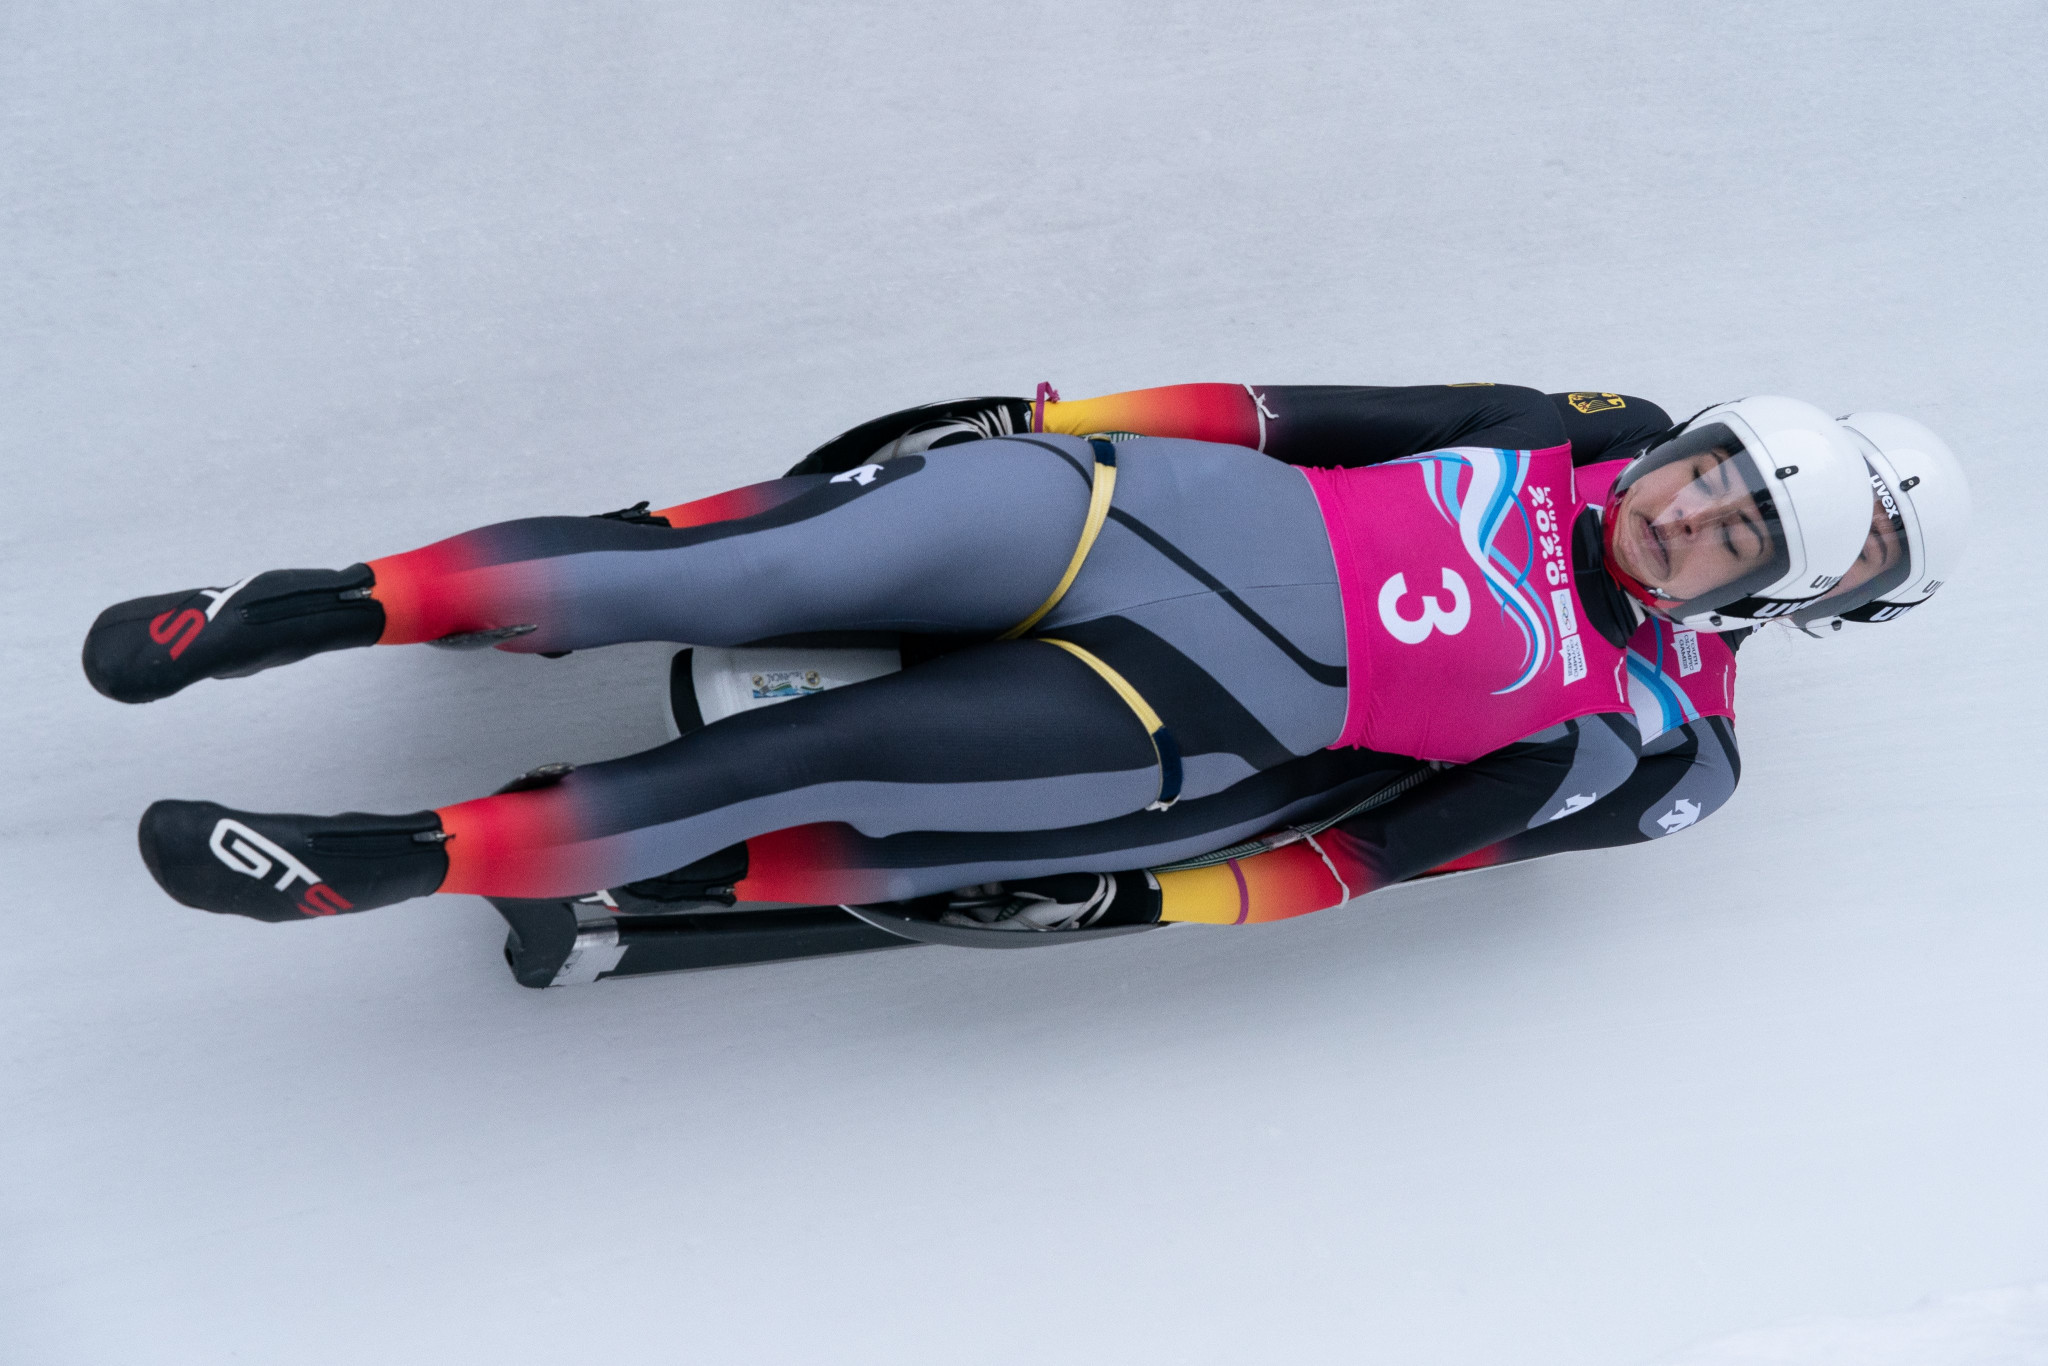 Women's doubles luge to be added to FIL Junior World Cup circuit